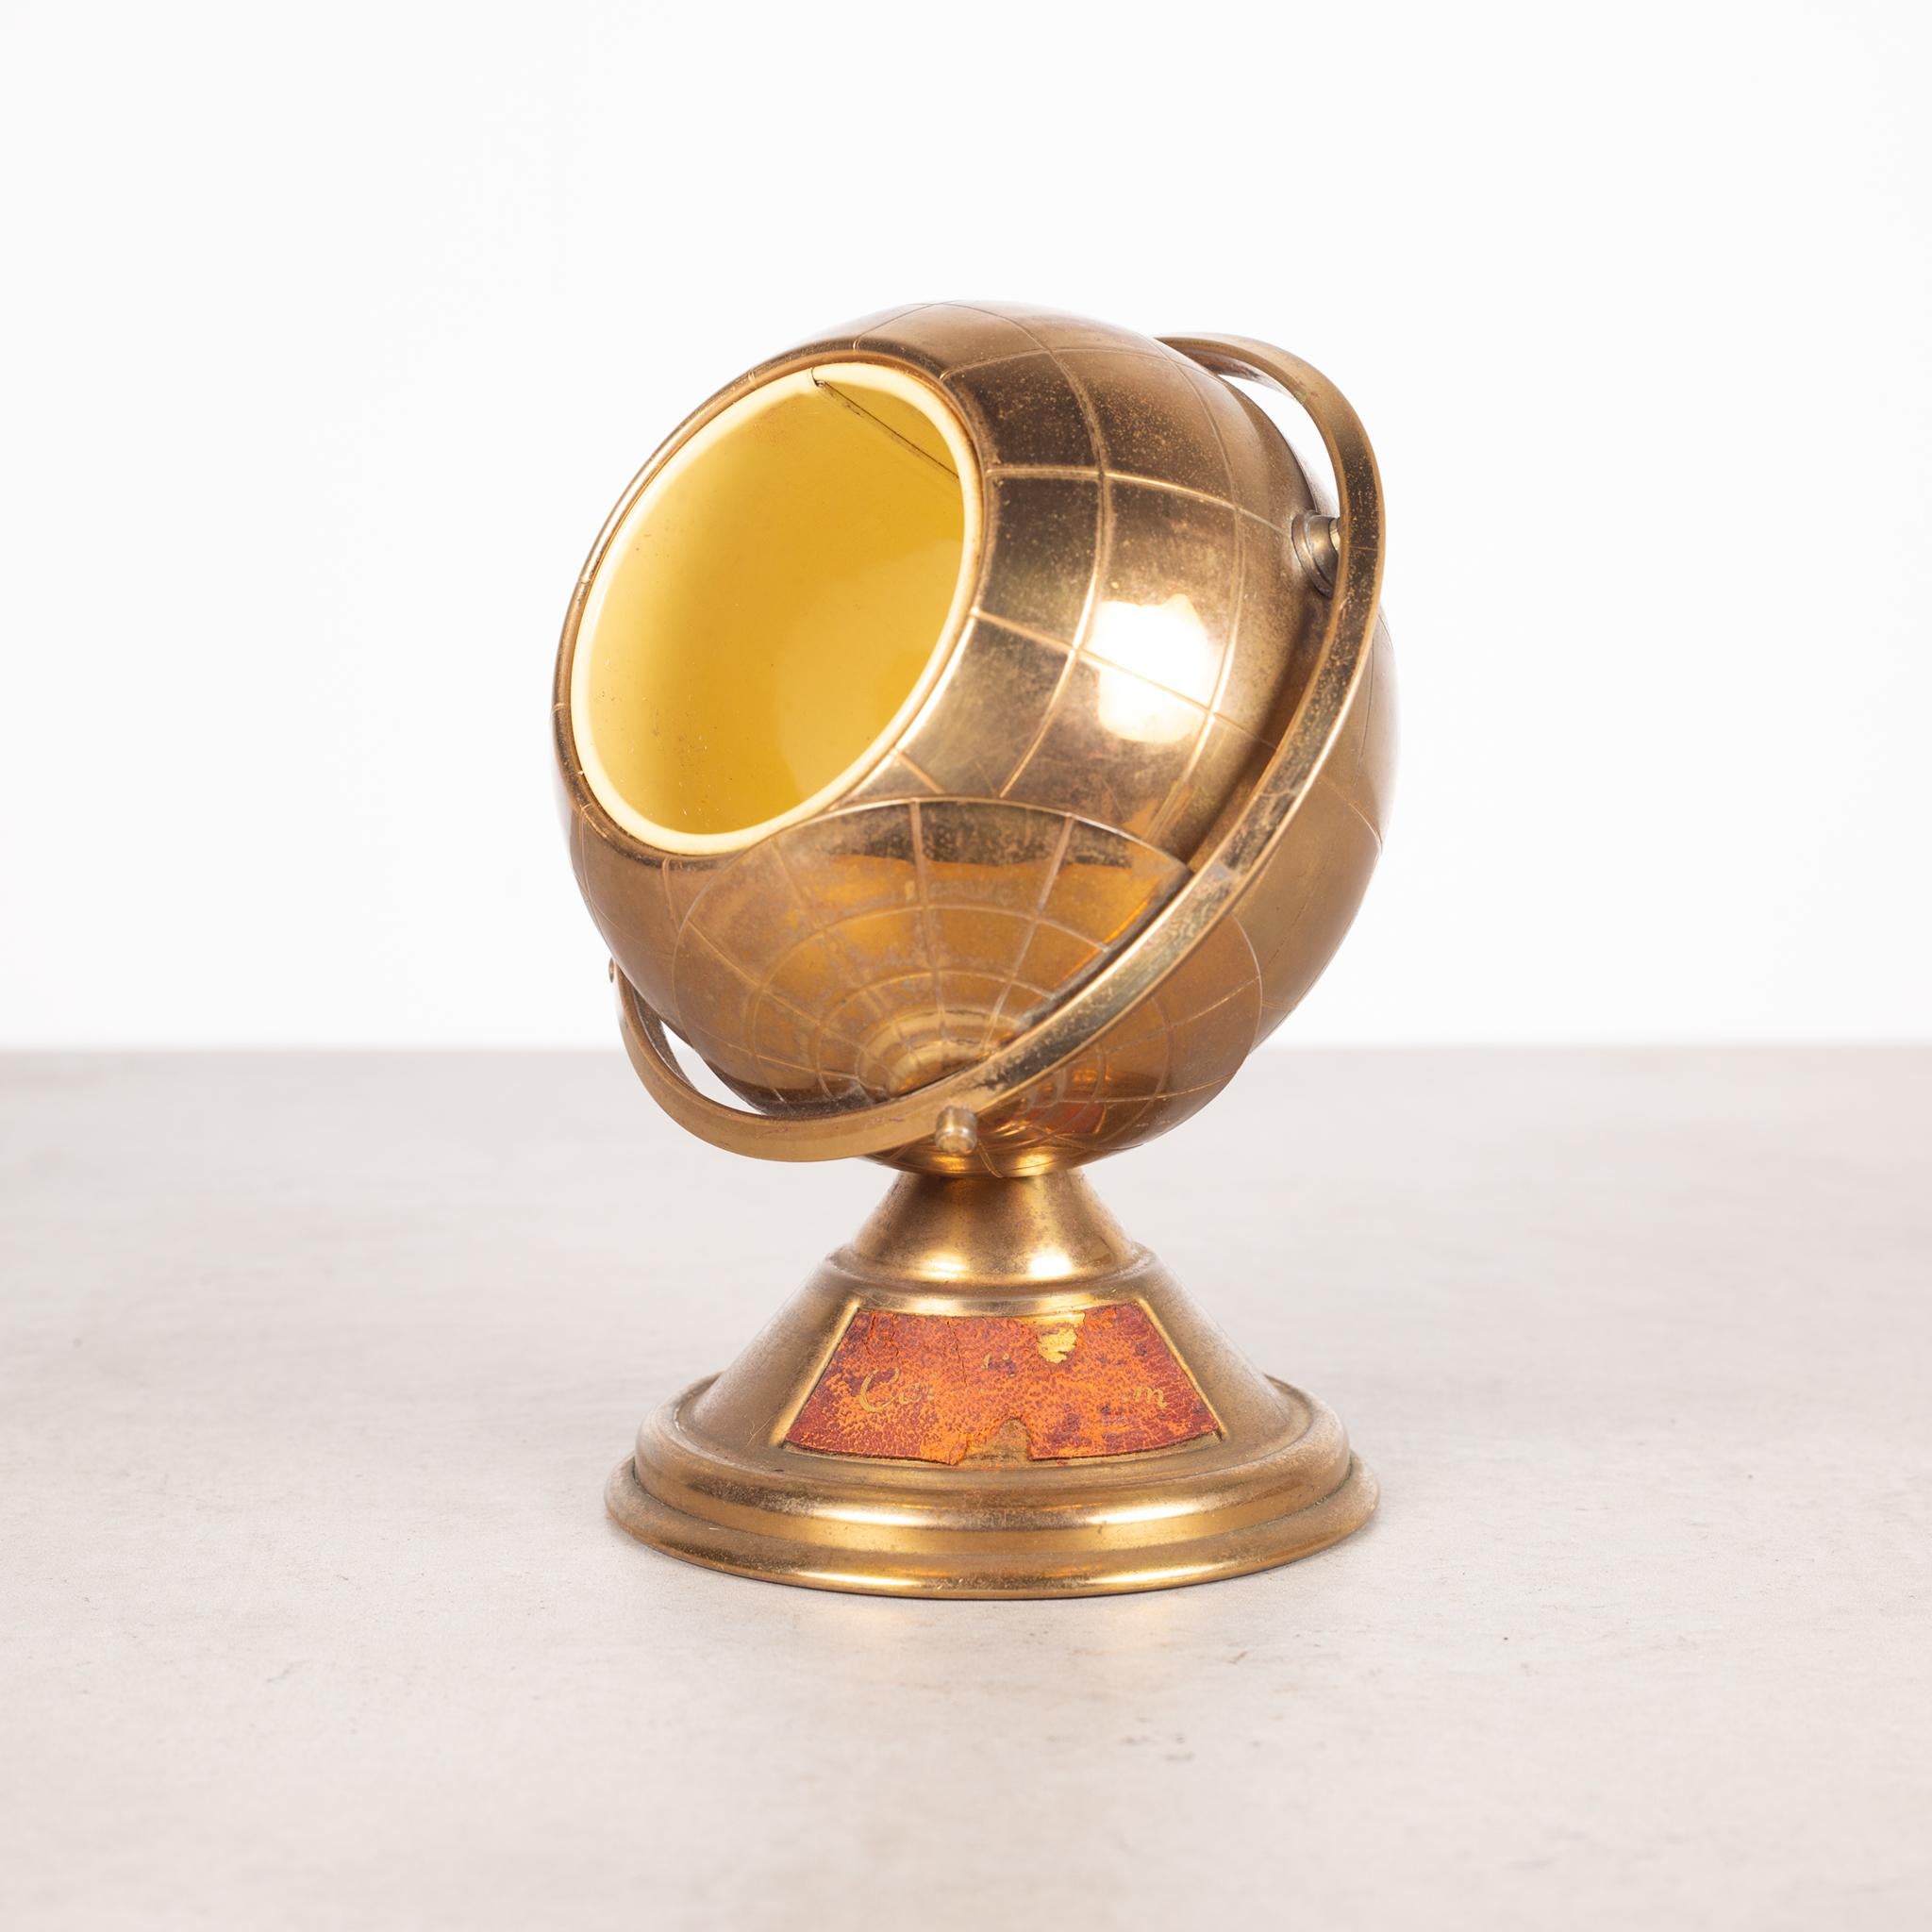 About 

This is an original mid-century brass cigarette holder. The lid slides open on the globe's axis to reveal a metal interior designed to hold cigarettes. This globe is unique because it has a leather nameplate on the bottom. This piece has